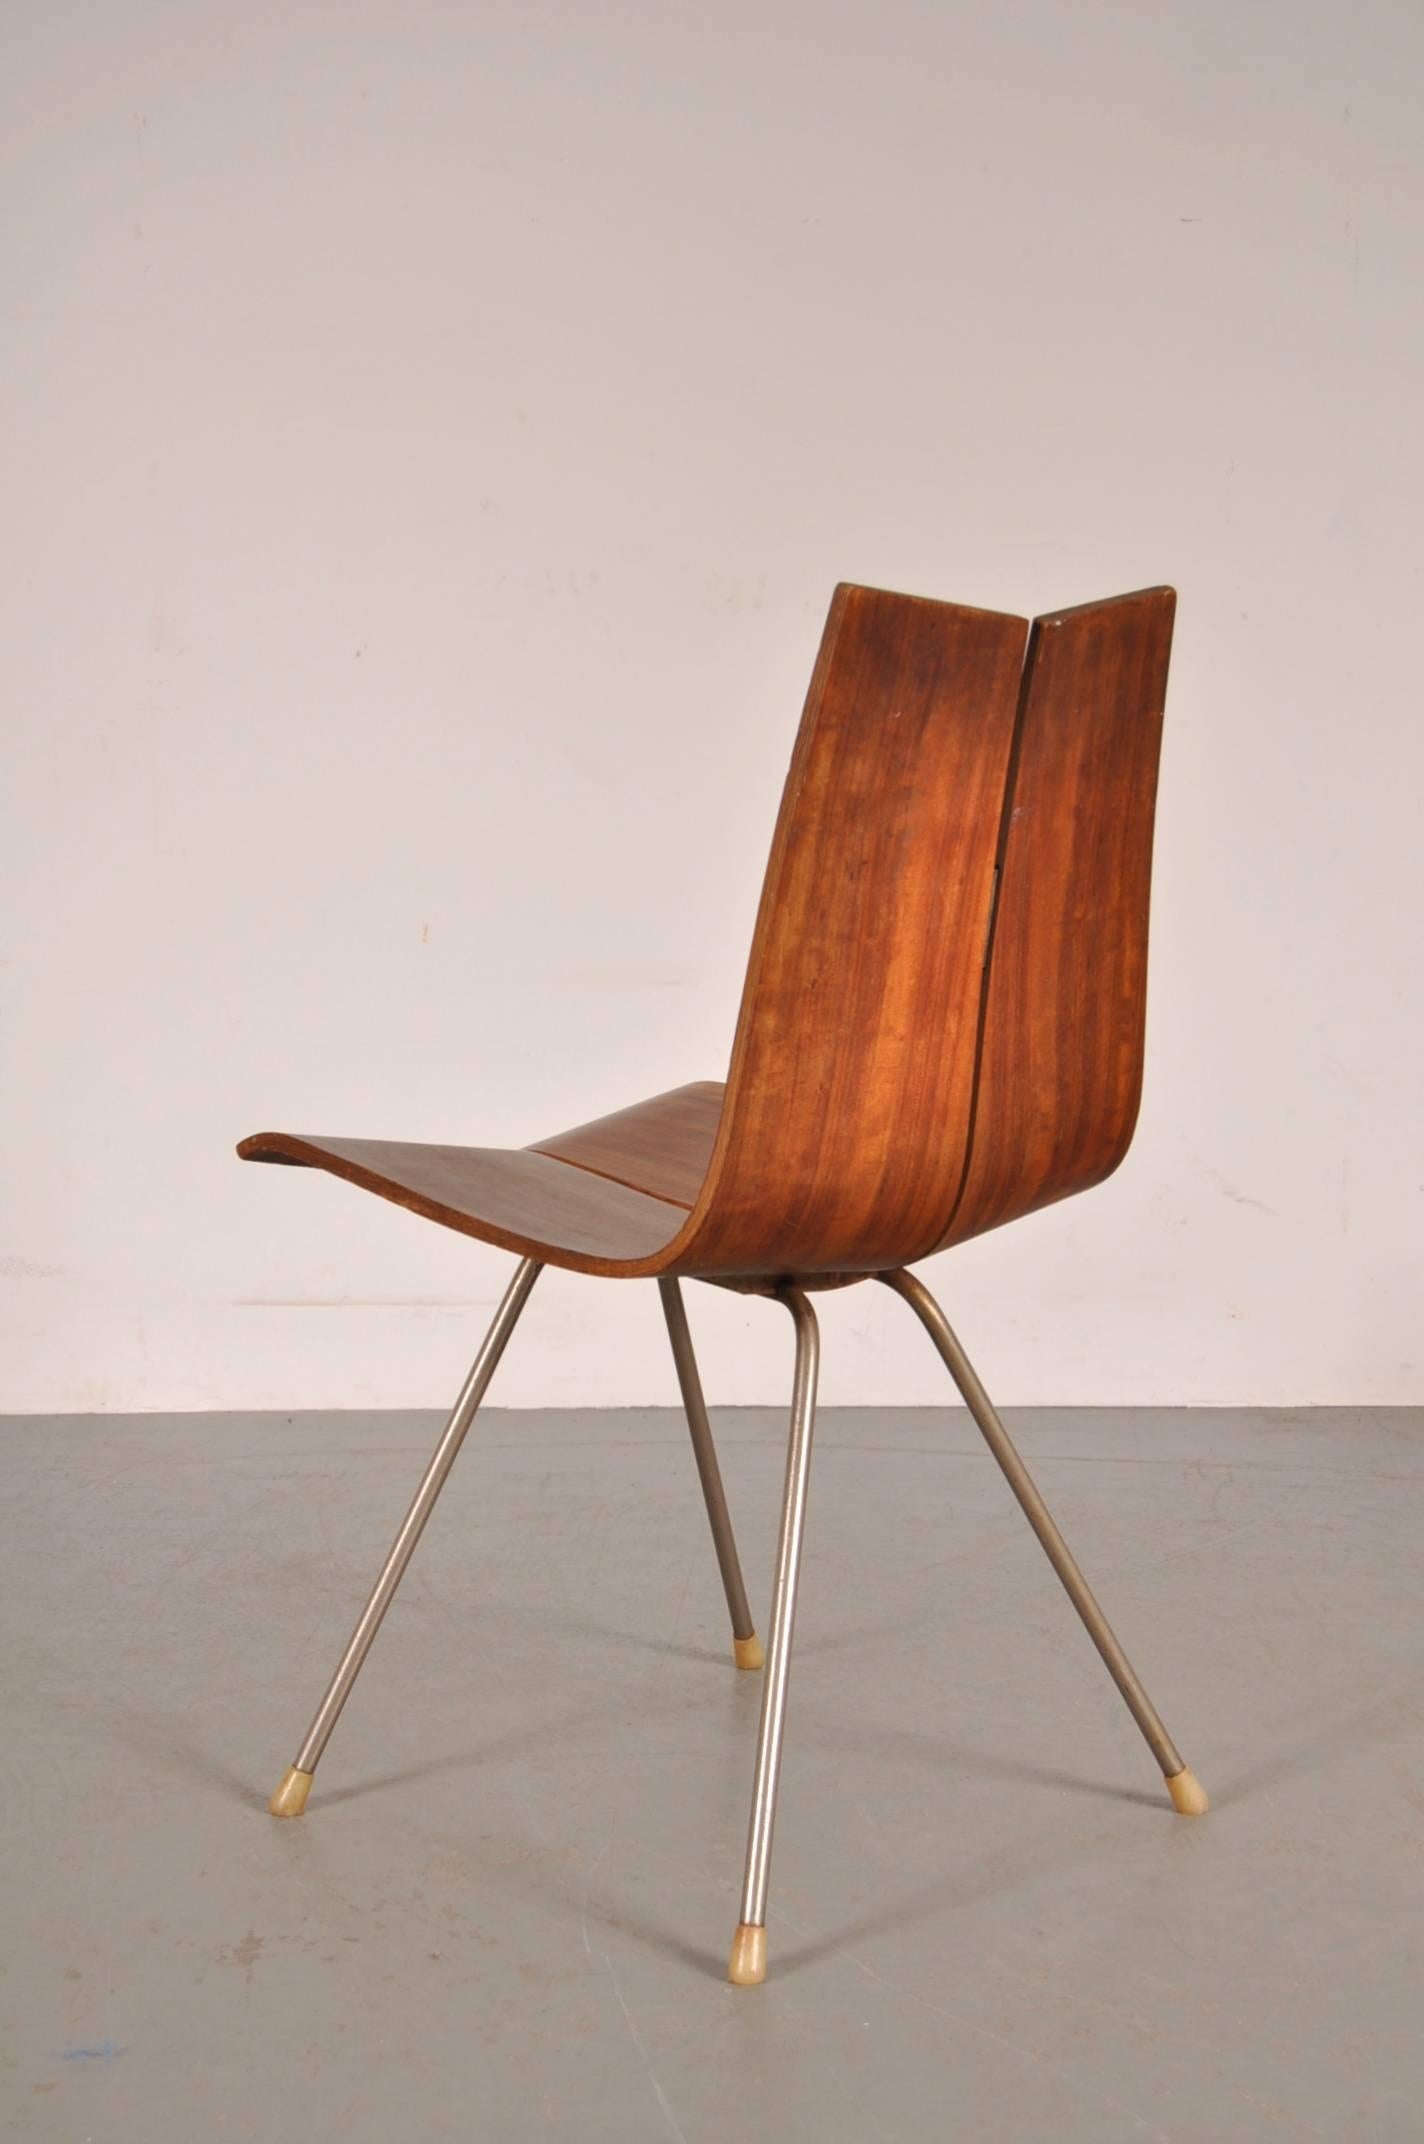 Stunning dining side chair designed by Hans Bellman, manufactured by Horgen-Glarus around 1950.

This wonderful piece is crafted from the most beautiful quality plywood on a metal base. It's highly recognizable design, with the seat crafted from